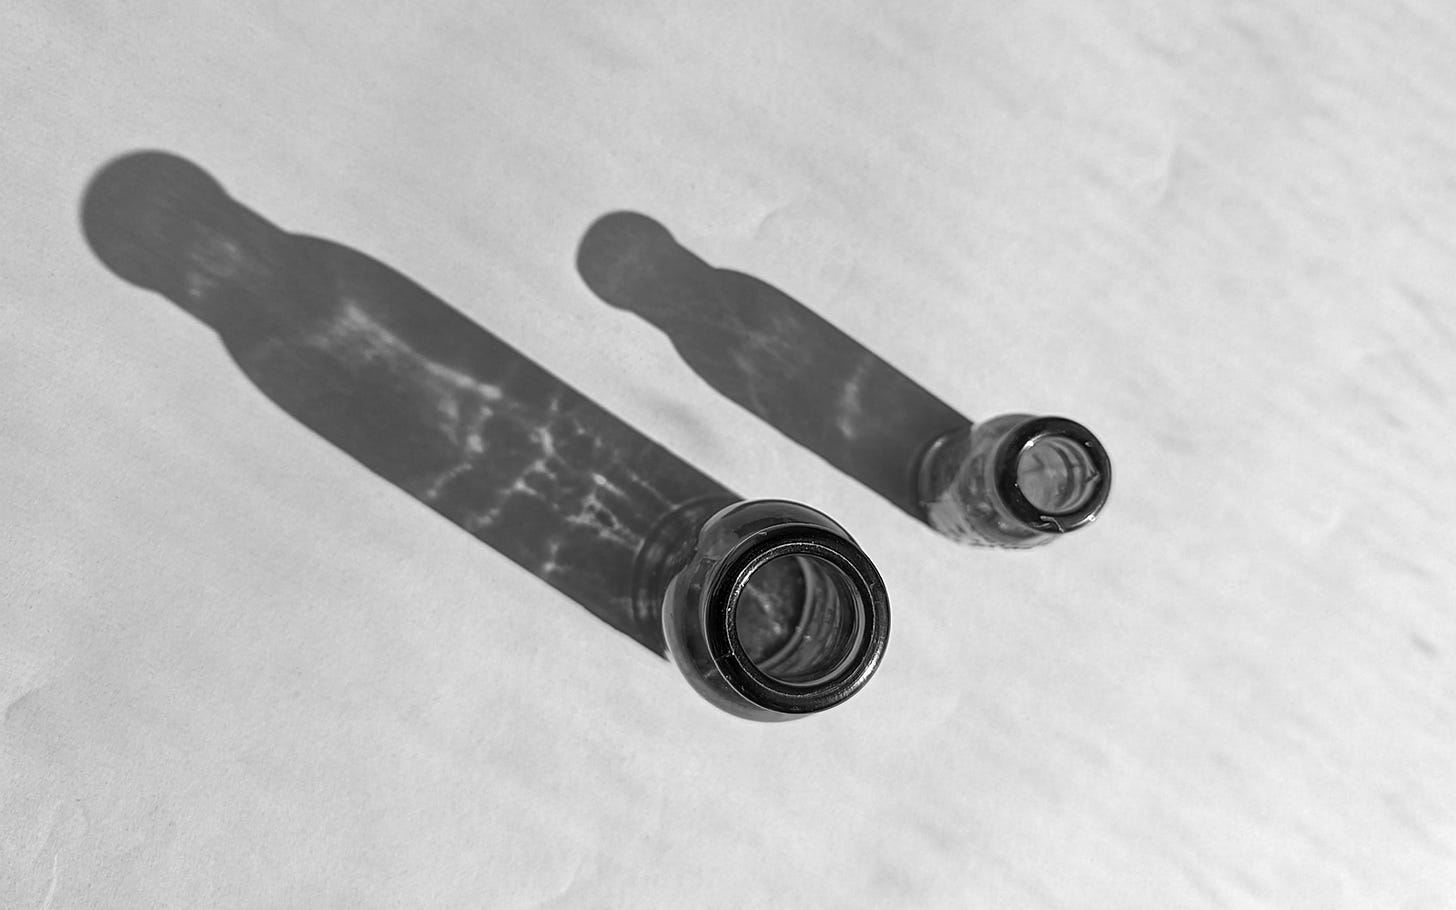 Two identical glass bottles cast shadows into the upper left hand corner of the ether.